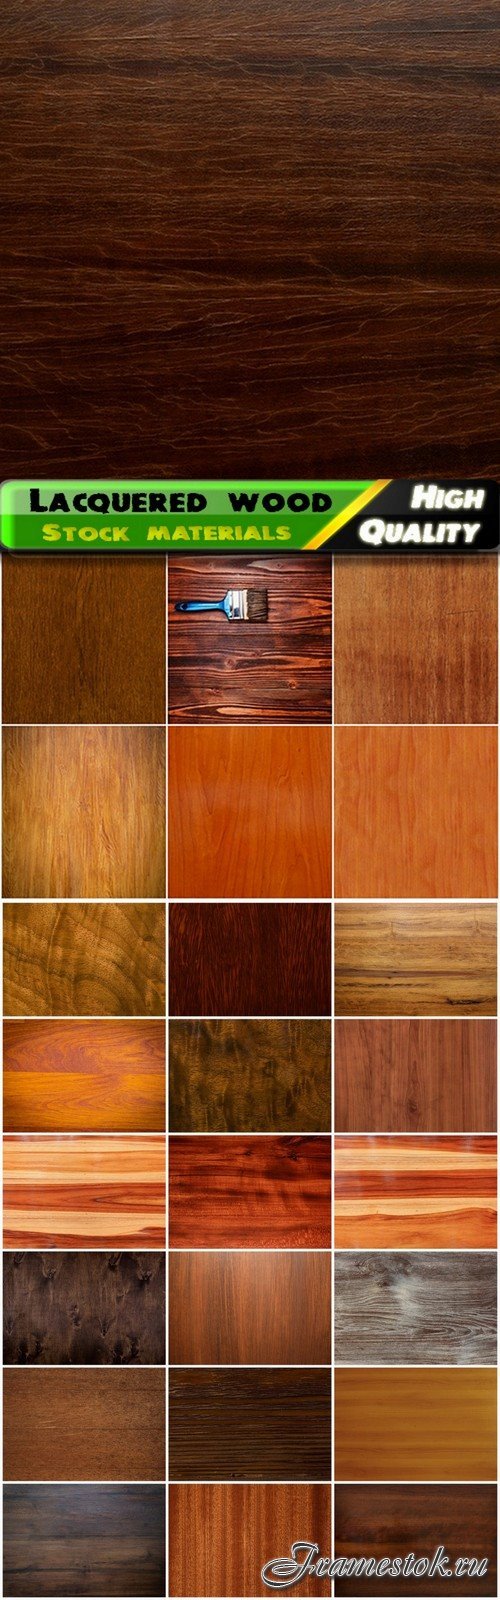 Textures of glossy lacquered wood - 25 HQ Jpg